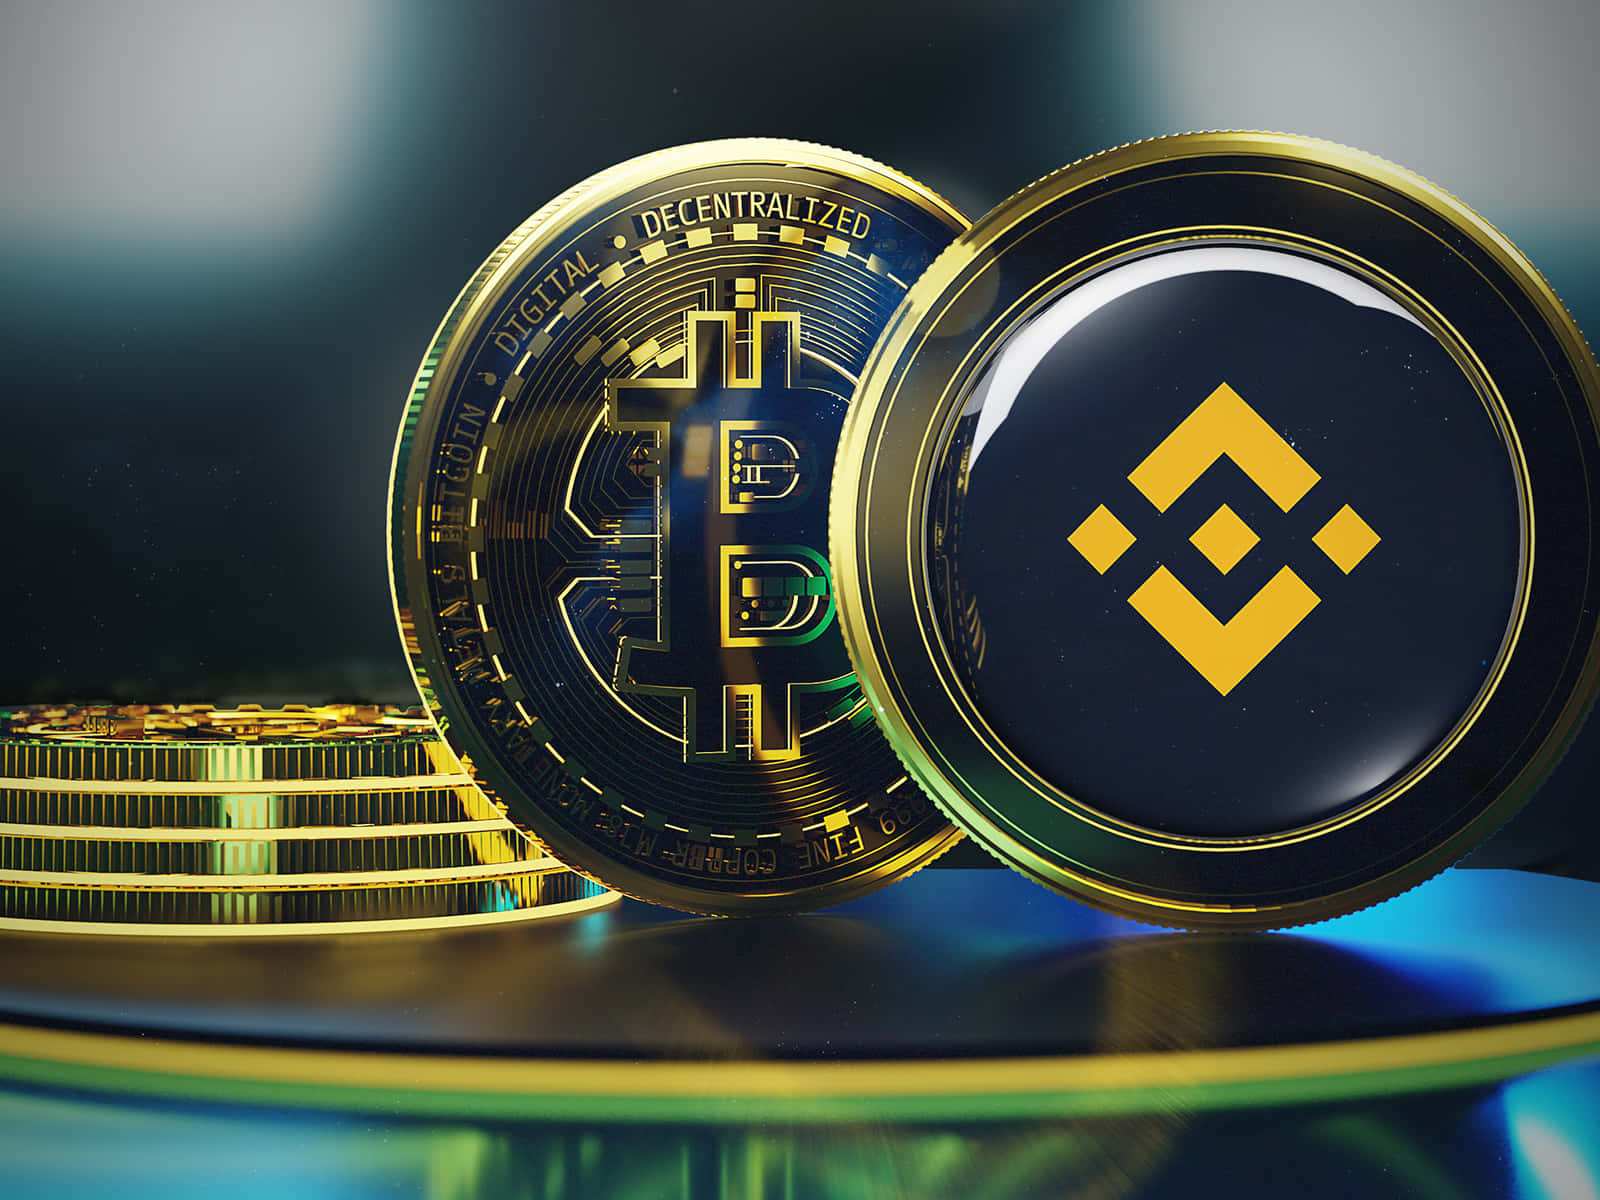 Get the most out of your crypto trading experience with Binance.